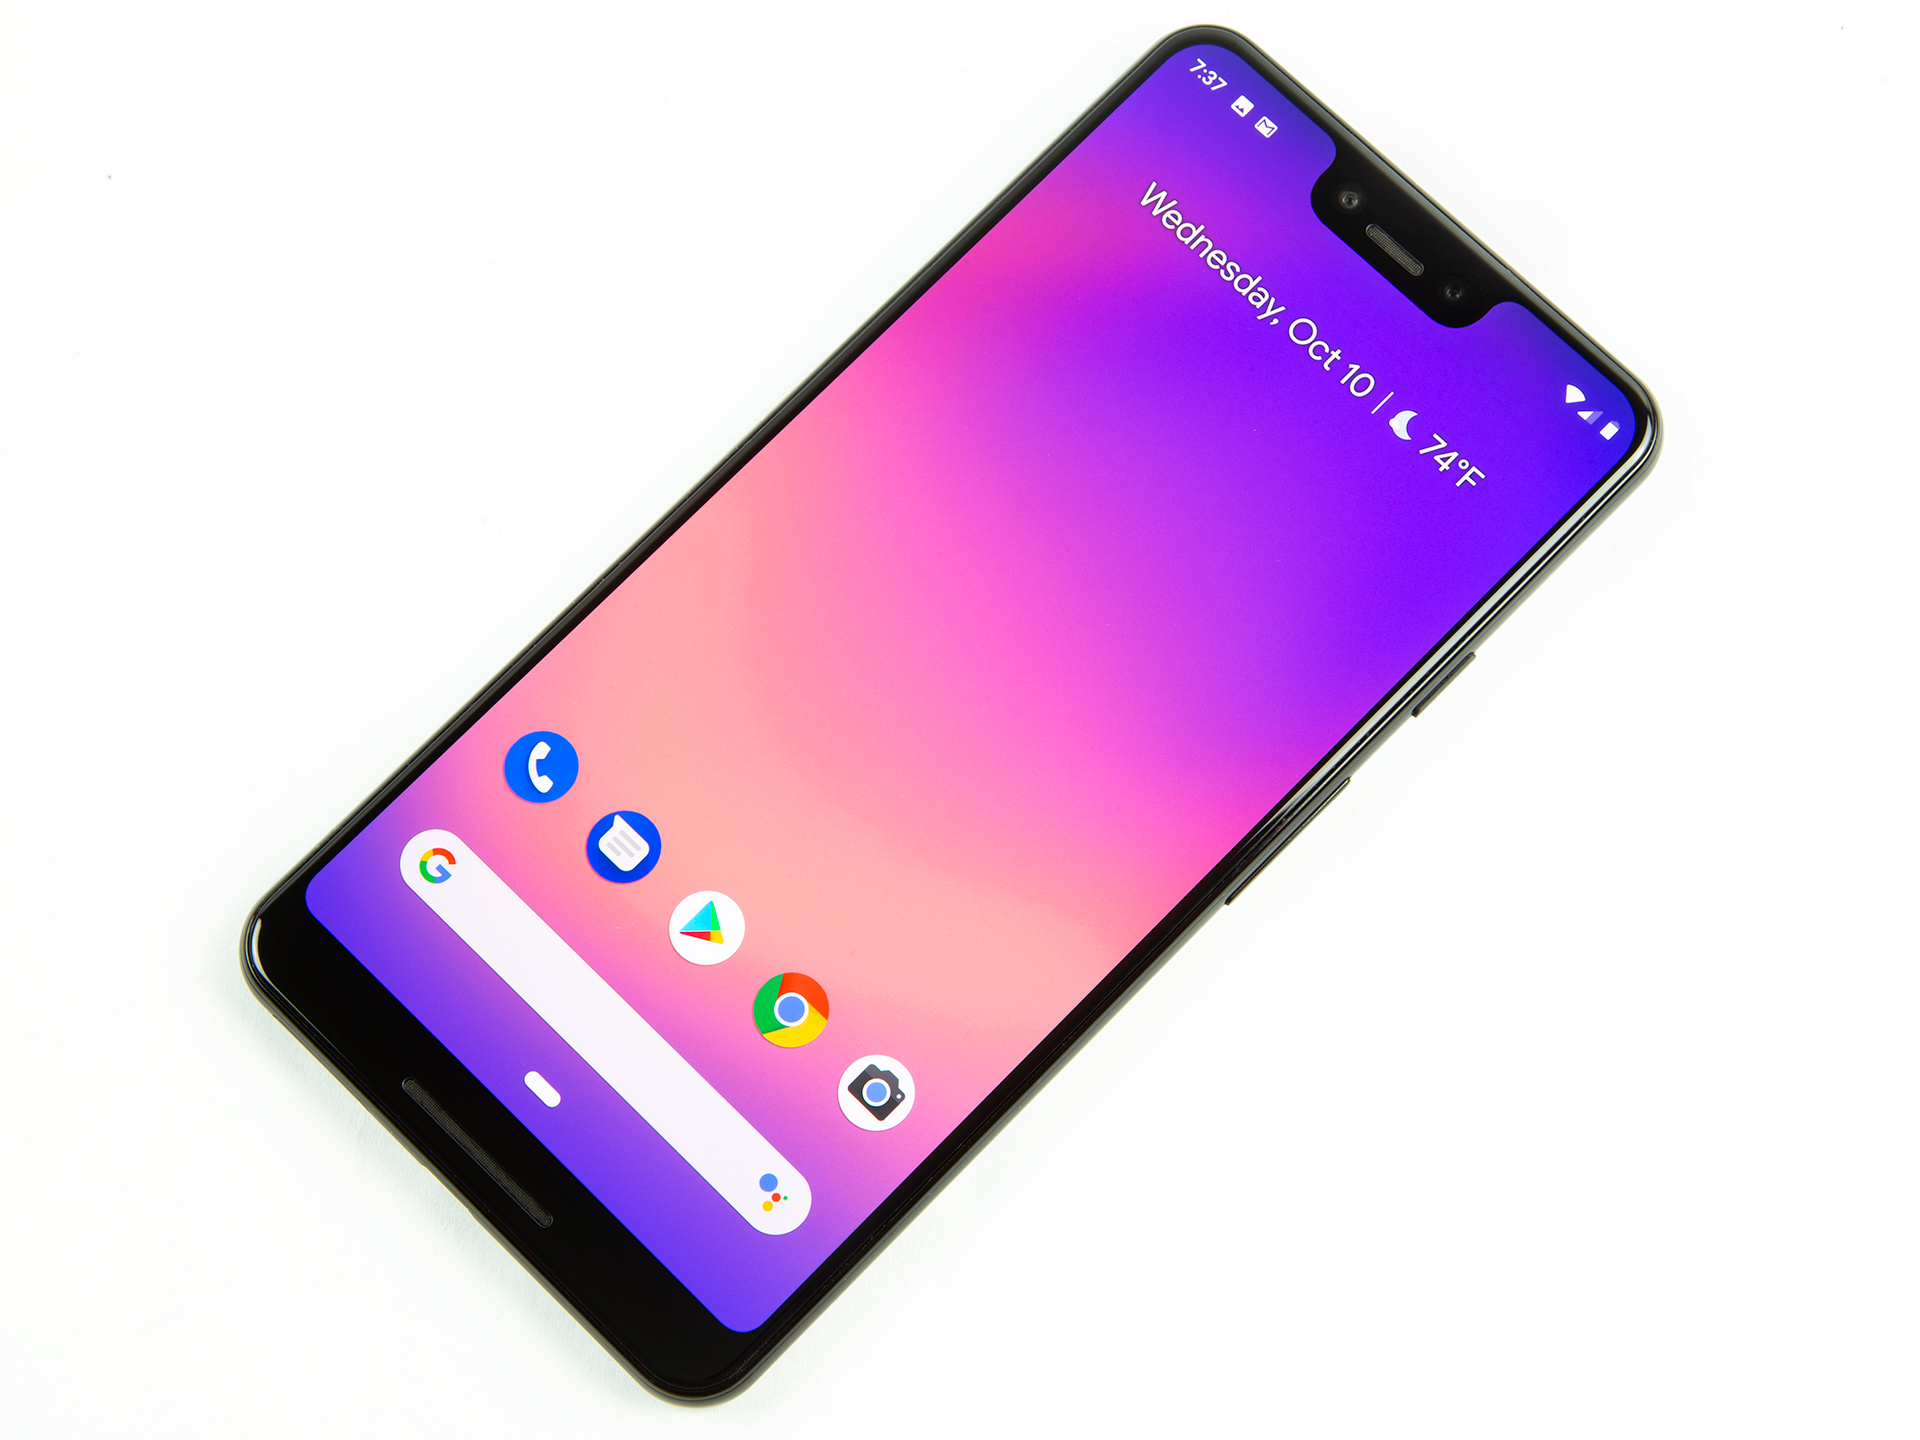 Google Pixel 3 and Pixel 3 XL product image